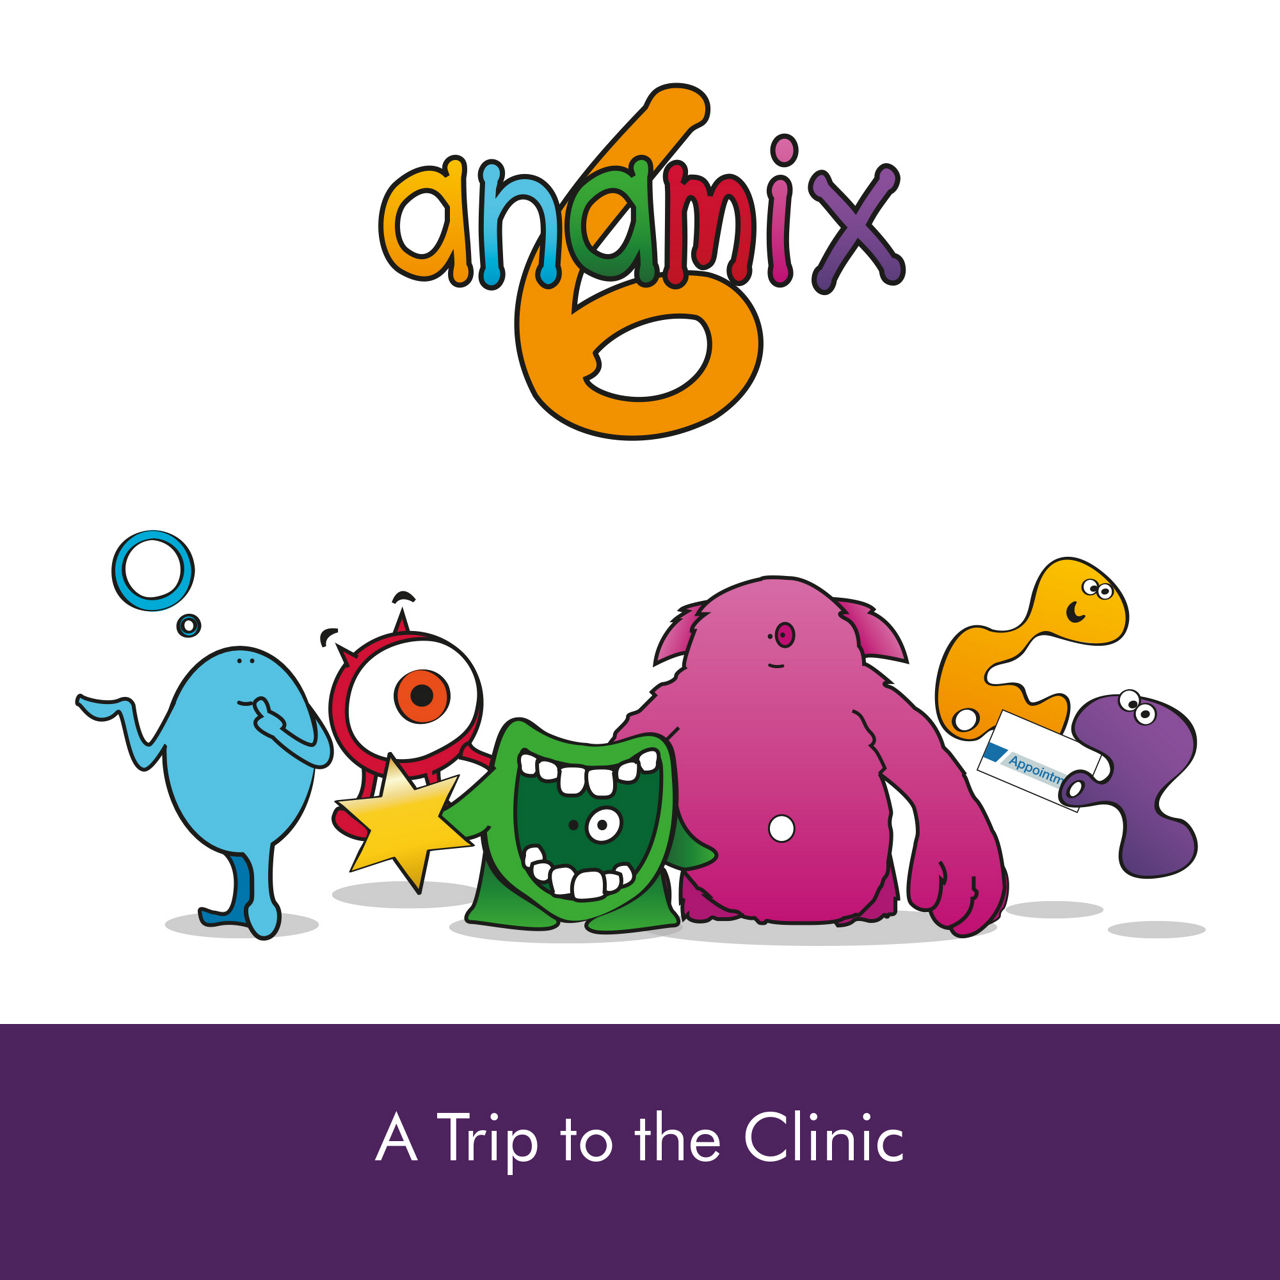 Anamix 6 a trip to the clinic